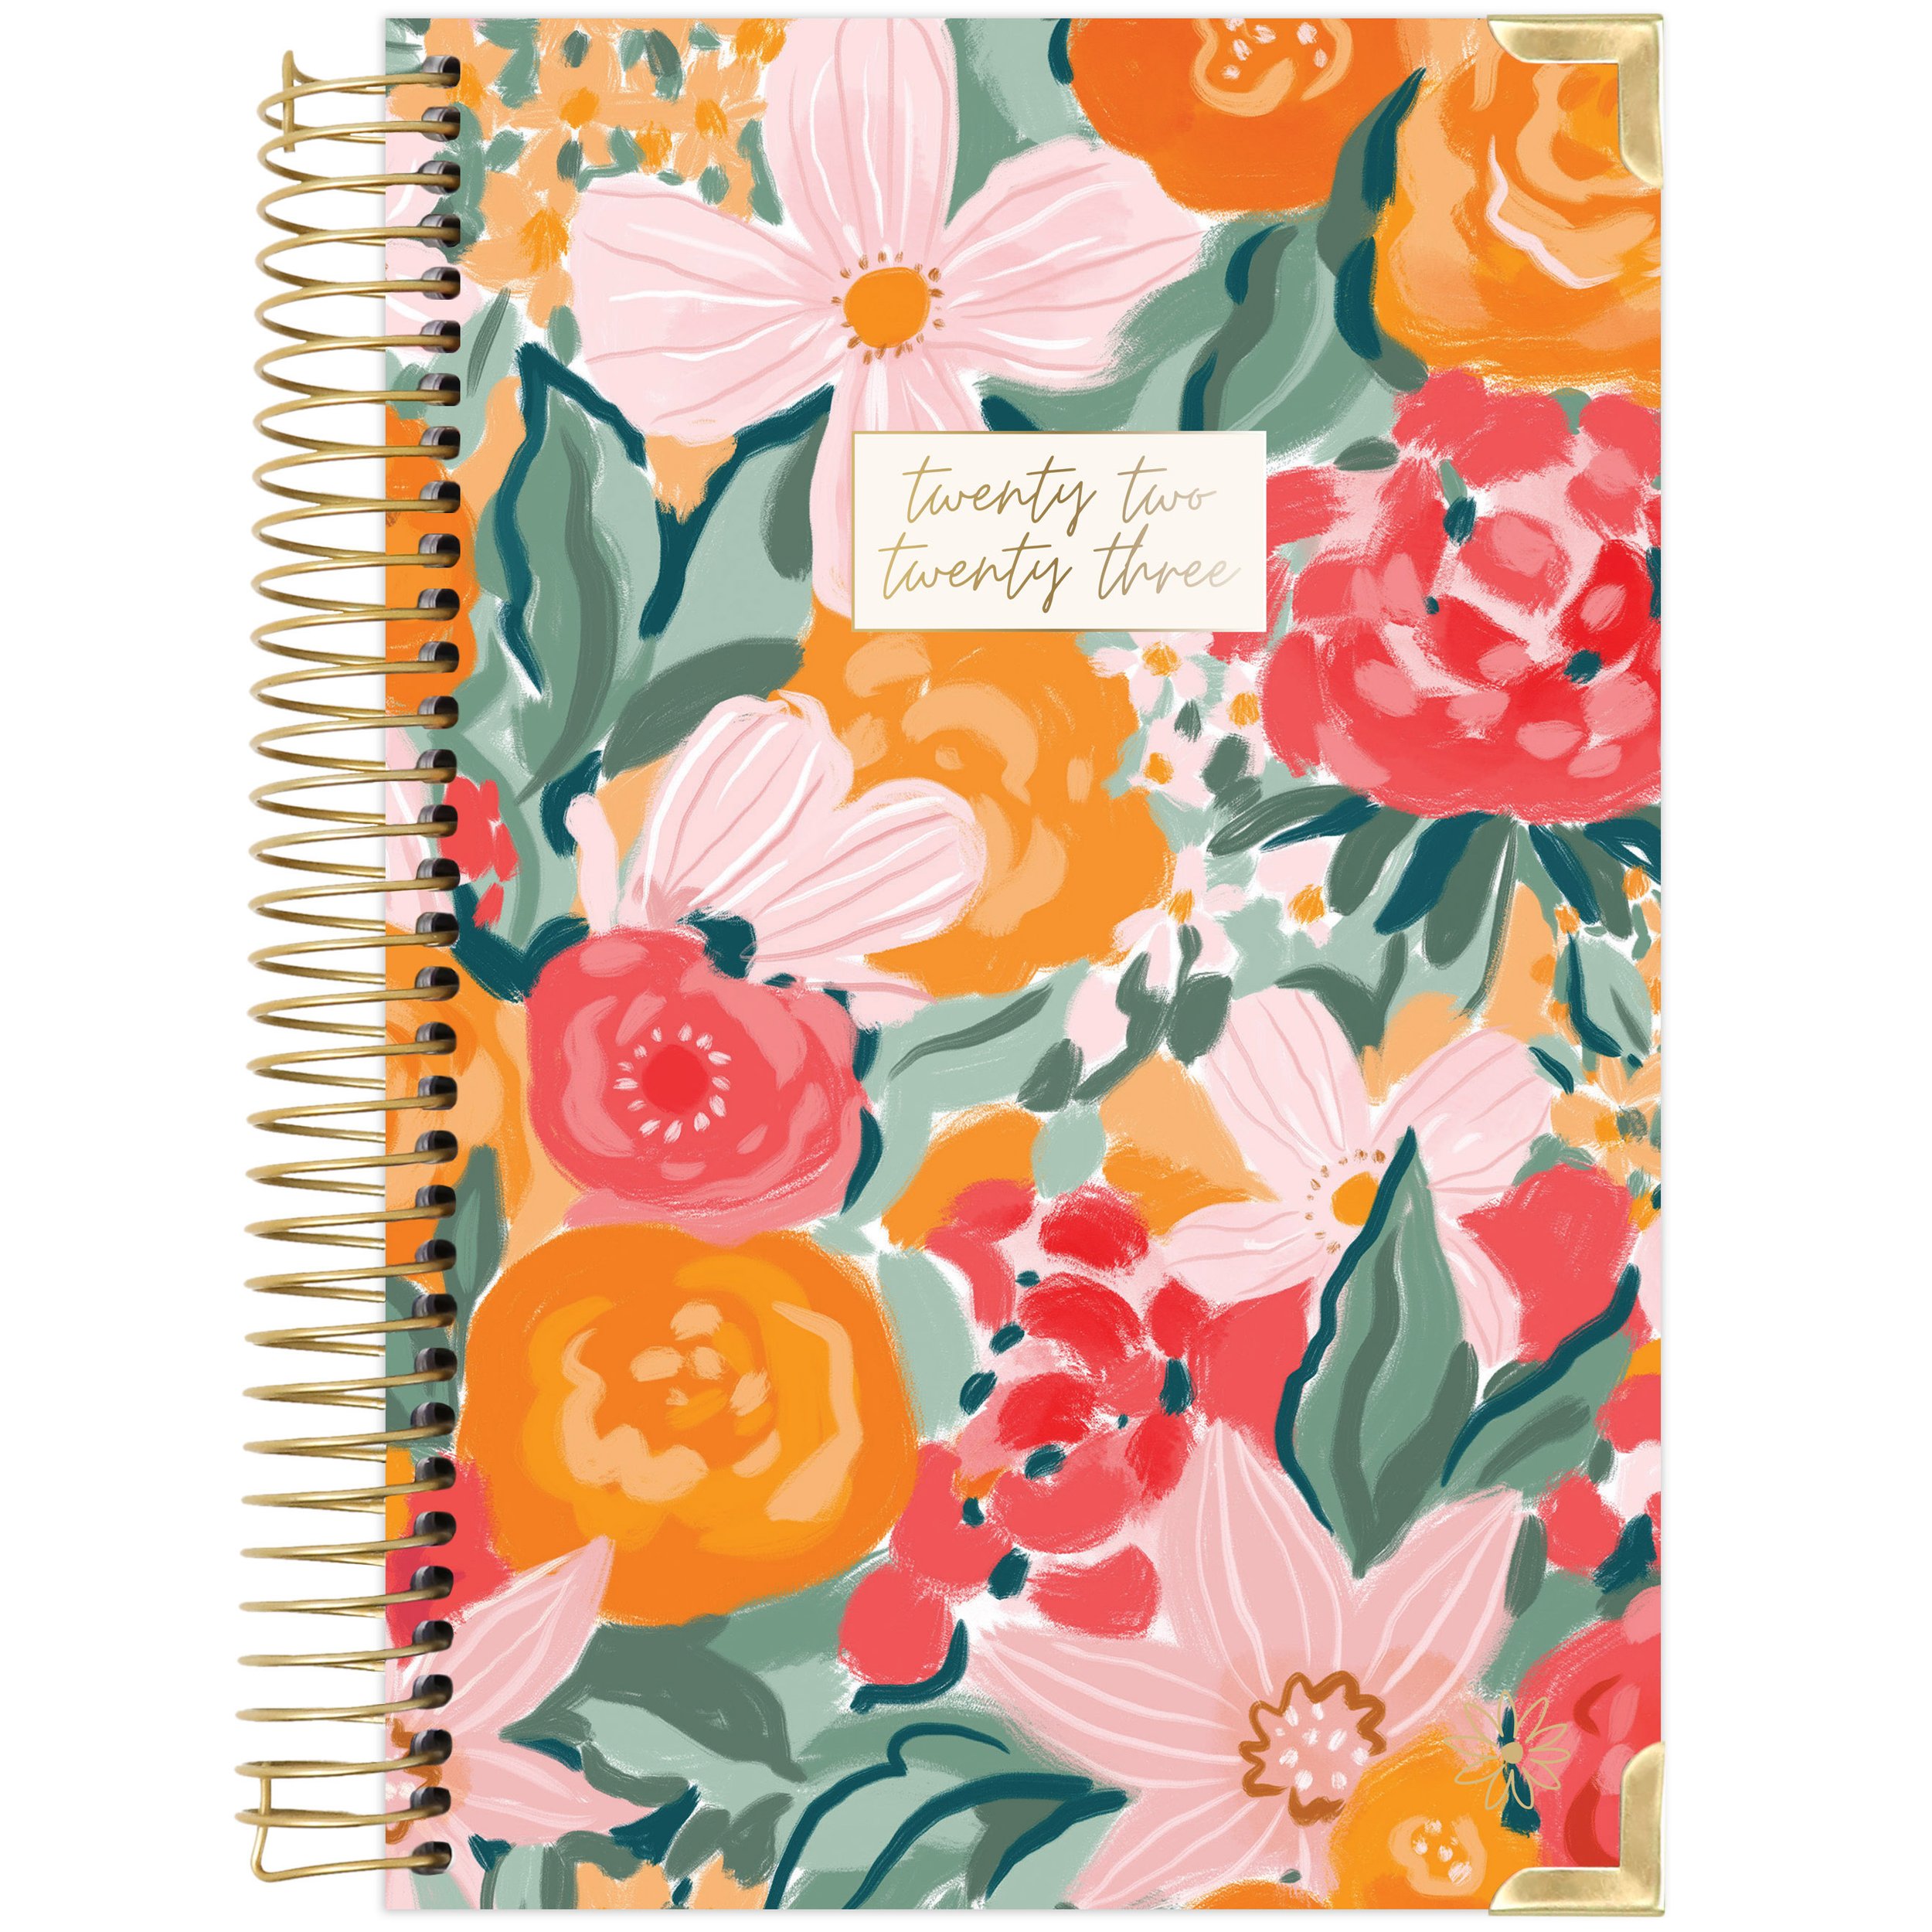 January 2022 - December 2022 - Weekly/Monthly Dated Agenda Organizer with Tabs 8.5 x 11 Calendar Year Day Planner Celestial bloom daily planners 2022 